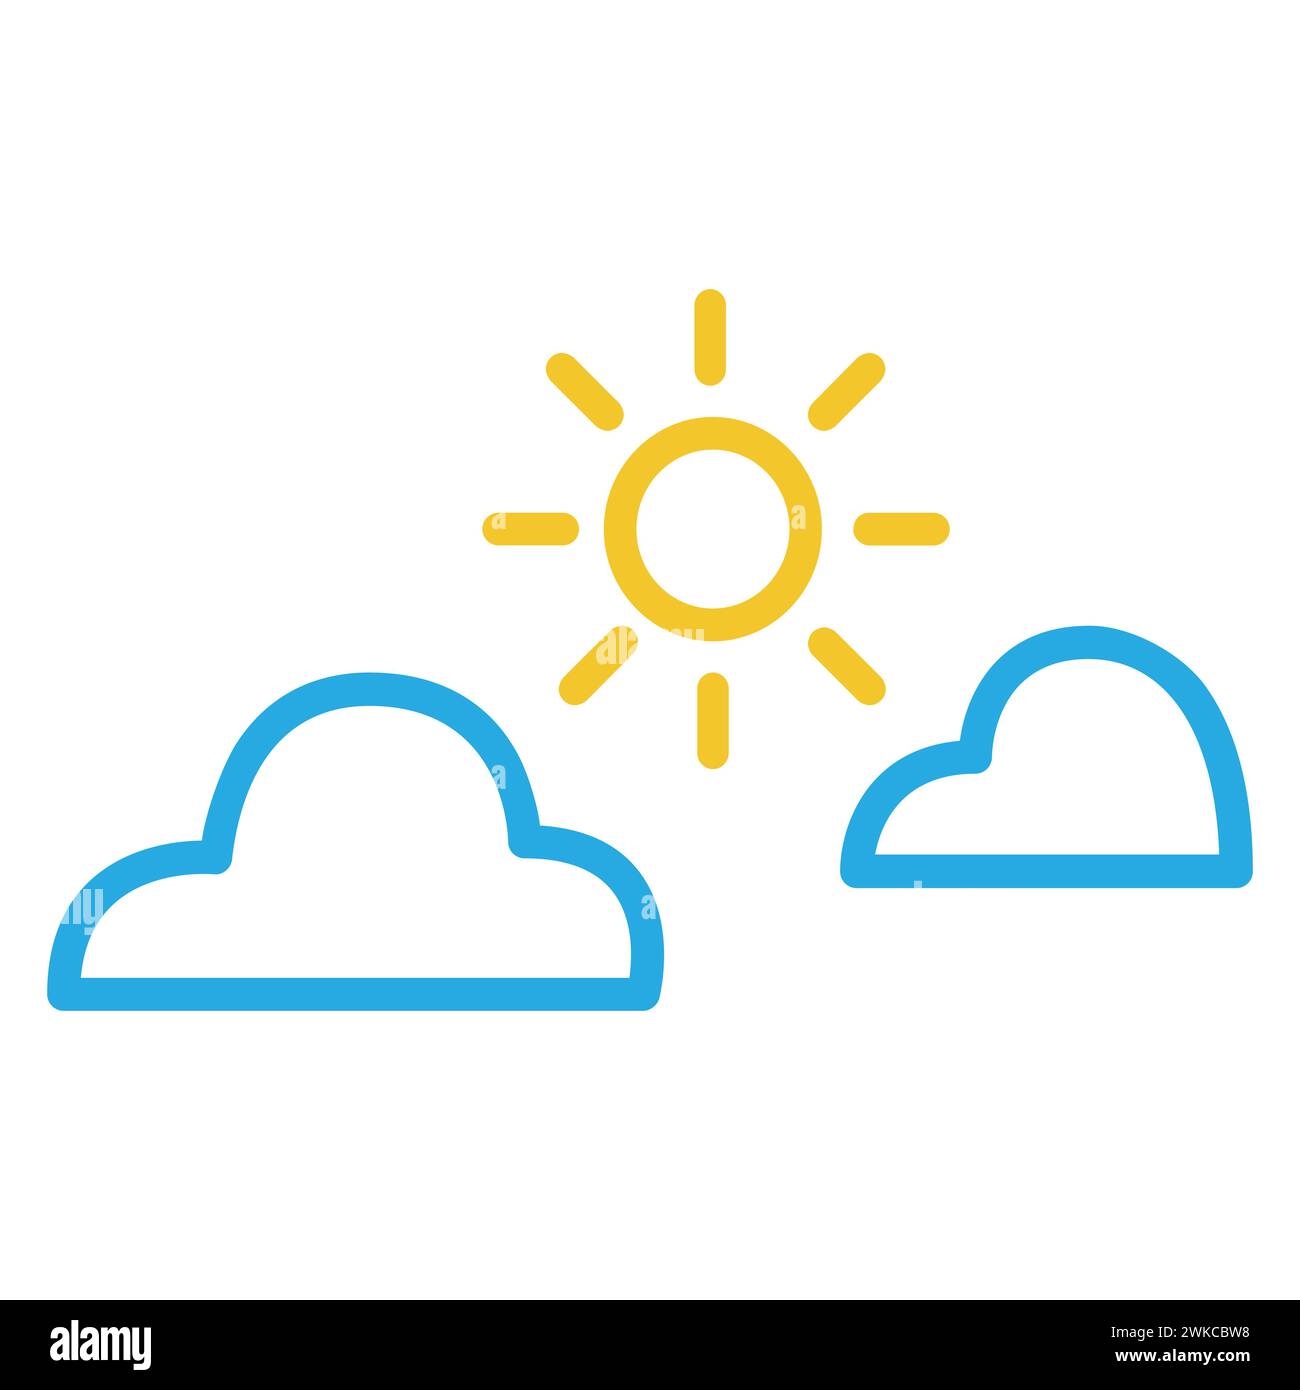 Blue Clouds With Yellow Sun Line Icon Stock Vector